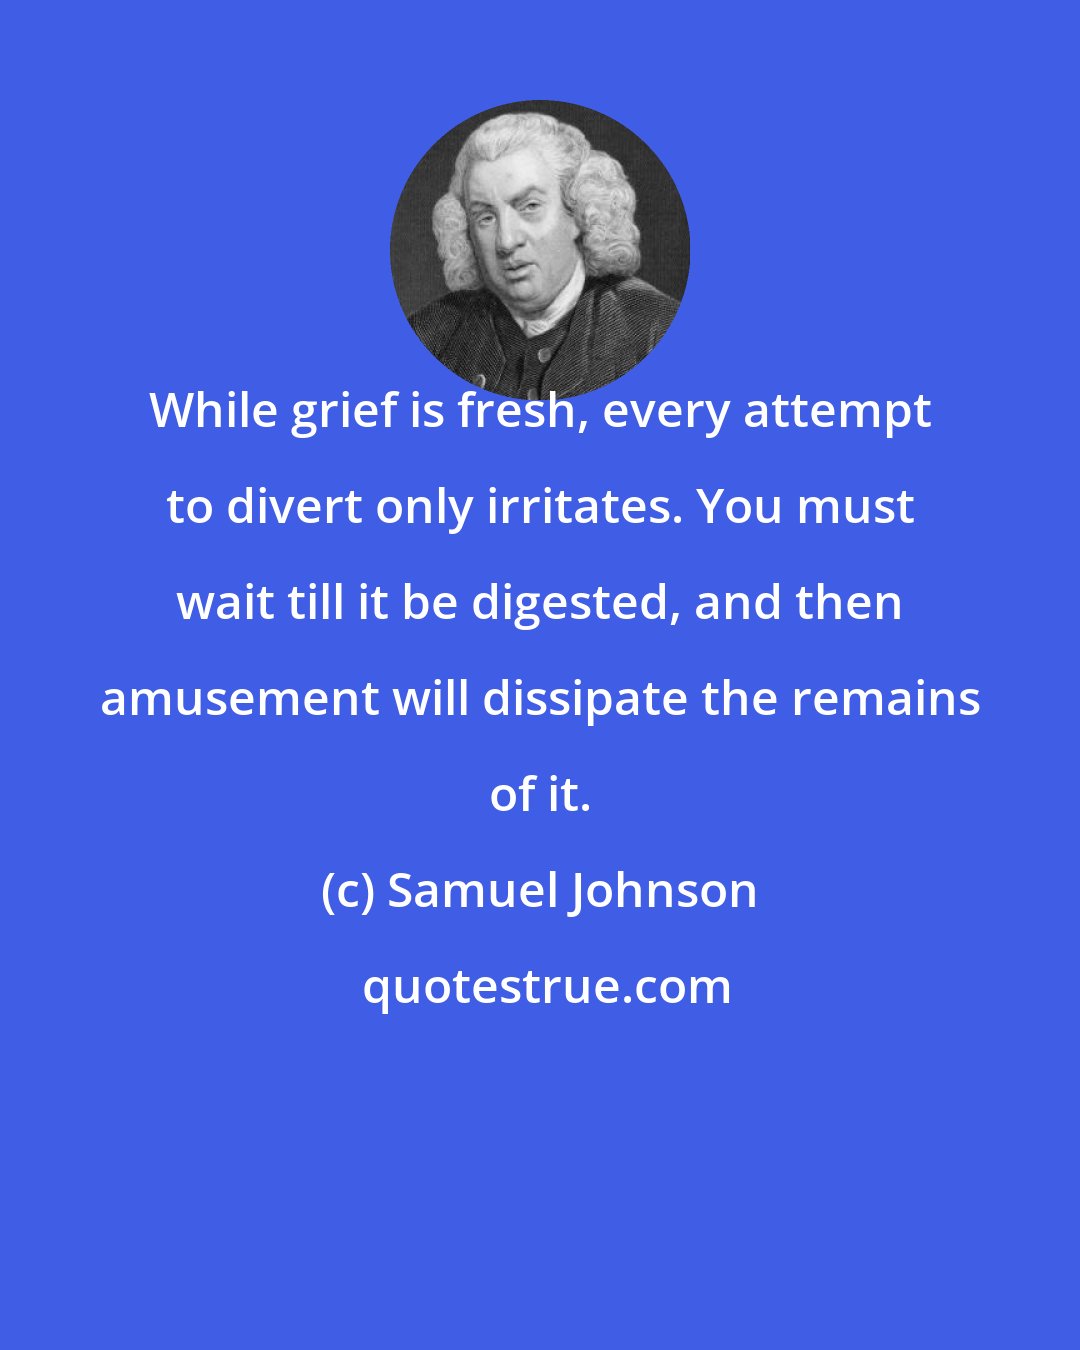 Samuel Johnson: While grief is fresh, every attempt to divert only irritates. You must wait till it be digested, and then amusement will dissipate the remains of it.